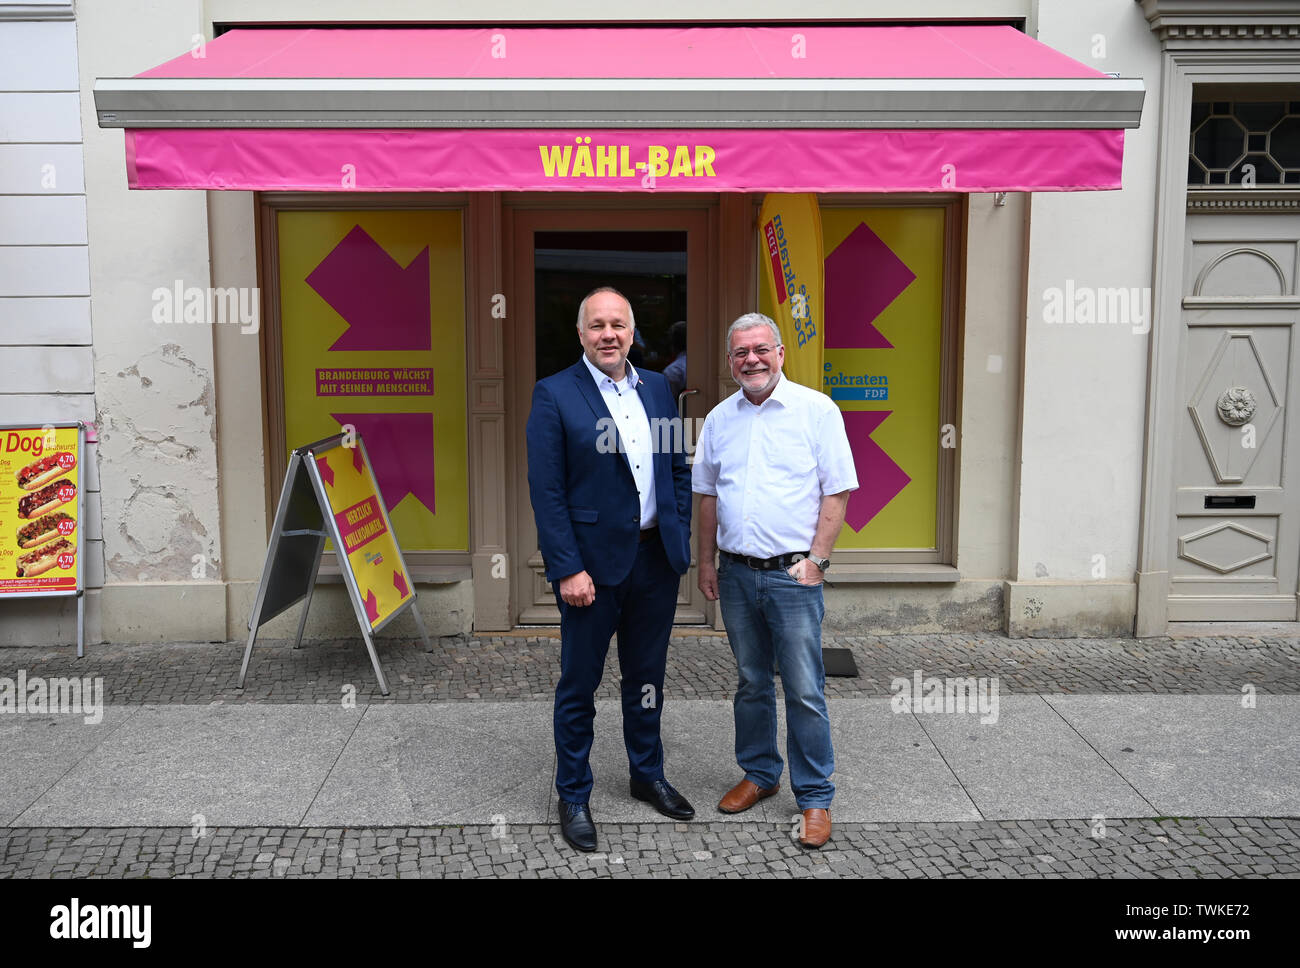 Potsdam, Germany. 21st June, 2019. Hans-Peter Goetz (l), top candidate of  the FDP in Brandenburg, and Axel Graf Bülow, FDP state chairman, are  standing in front of the "Wähl-Bar", the FDP election